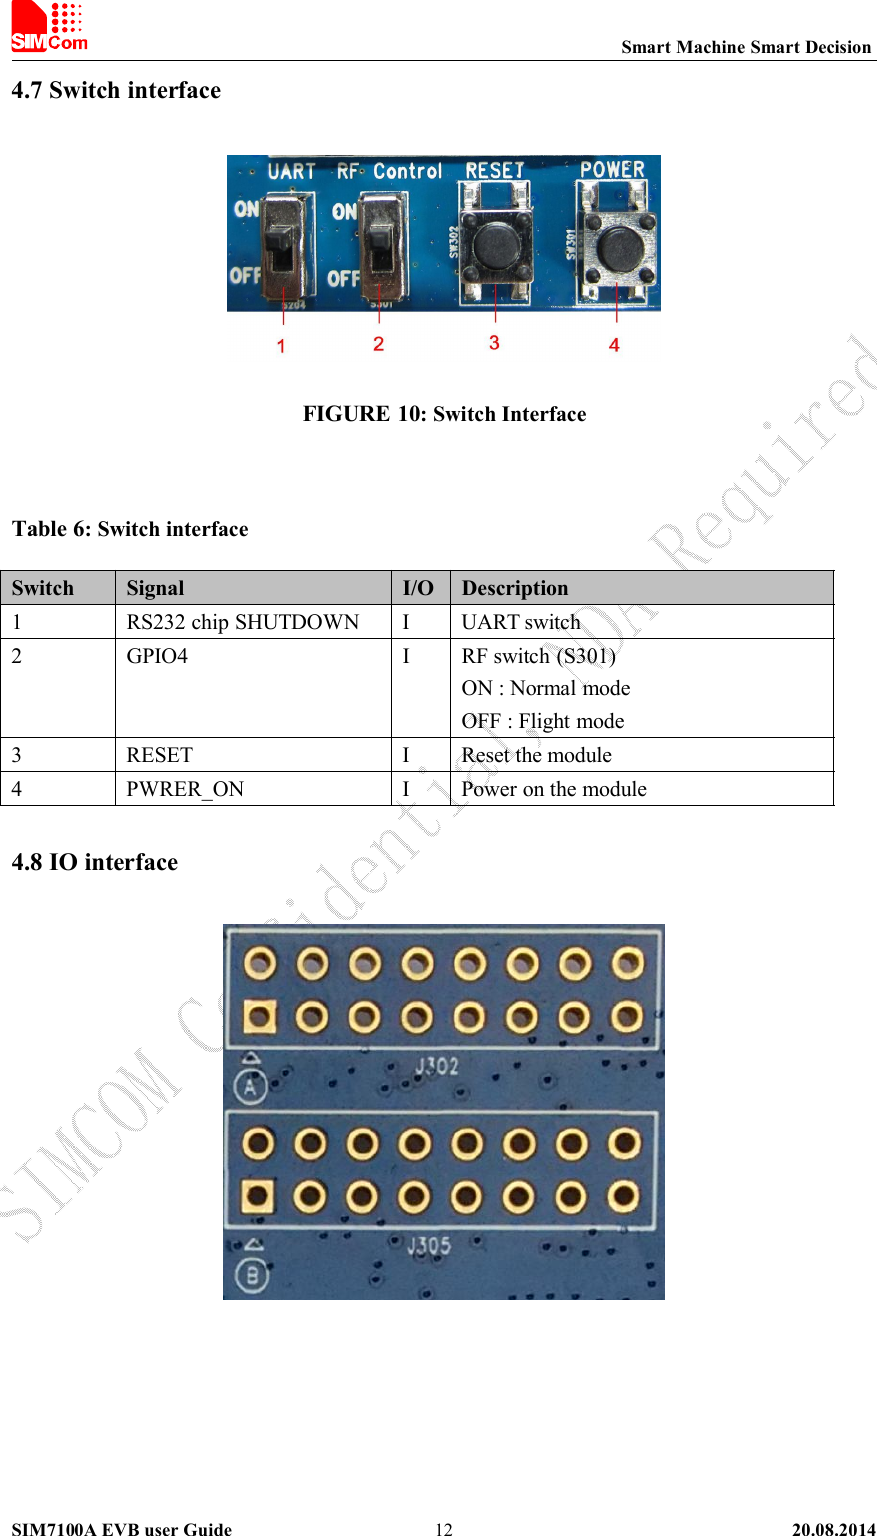 Smart Machine Smart DecisionSIM7100A EVB user Guide 20.08.2014124.7 Switch interfaceFIGURE 10: Switch InterfaceTable 6: Switch interfaceSwitch Signal I/O Description1 RS232 chip SHUTDOWN I UART switch2 GPIO4 I RF switch (S301)ON : Normal modeOFF : Flight mode3 RESET I Reset the module4 PWRER_ON I Power on the module4.8 IO interface